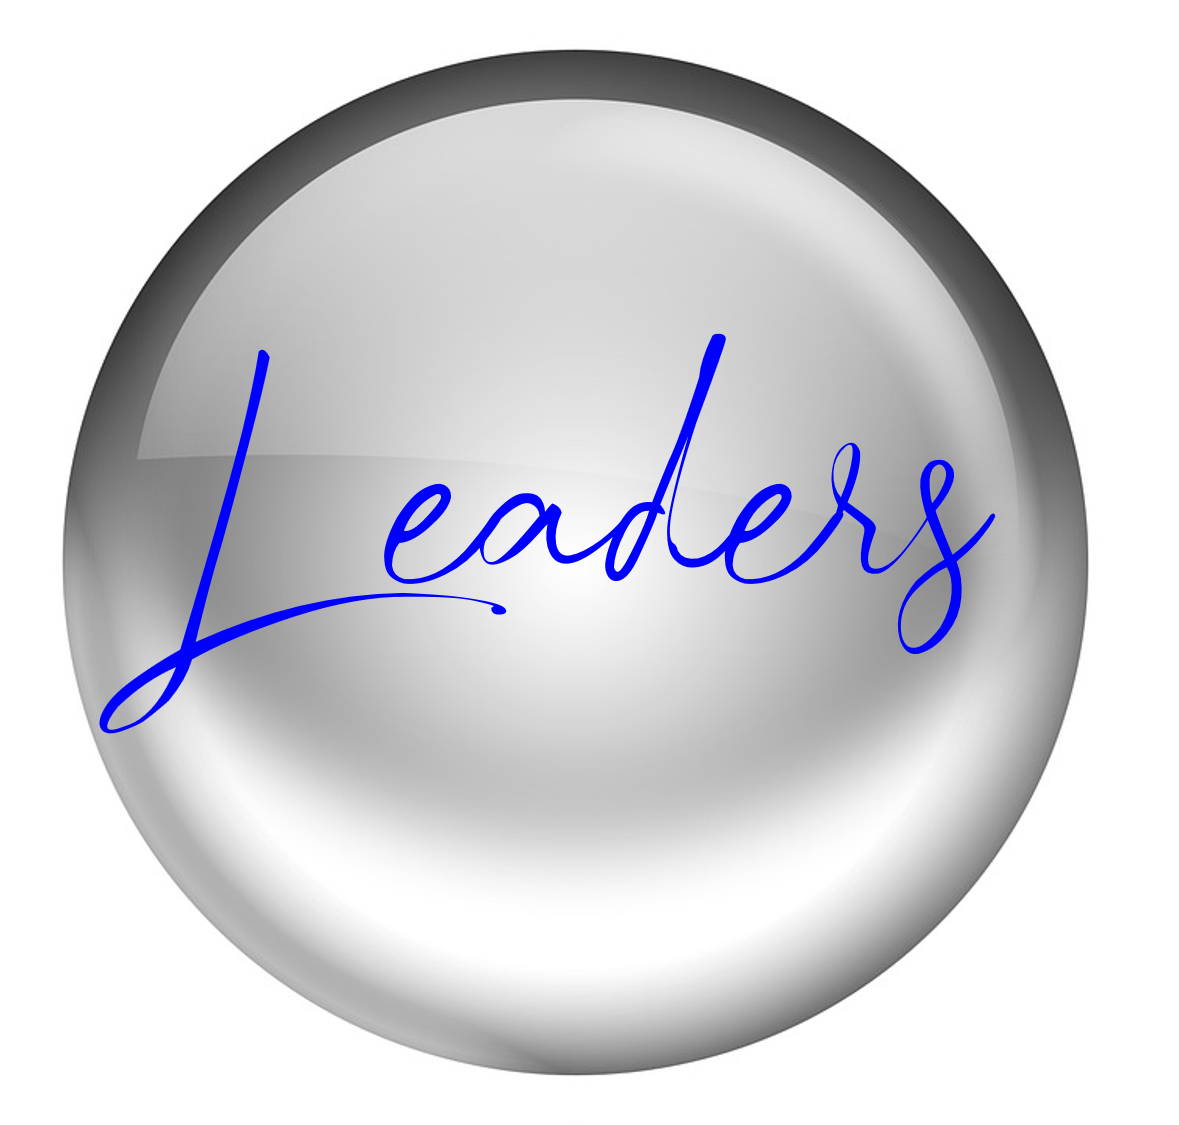 Leaders button